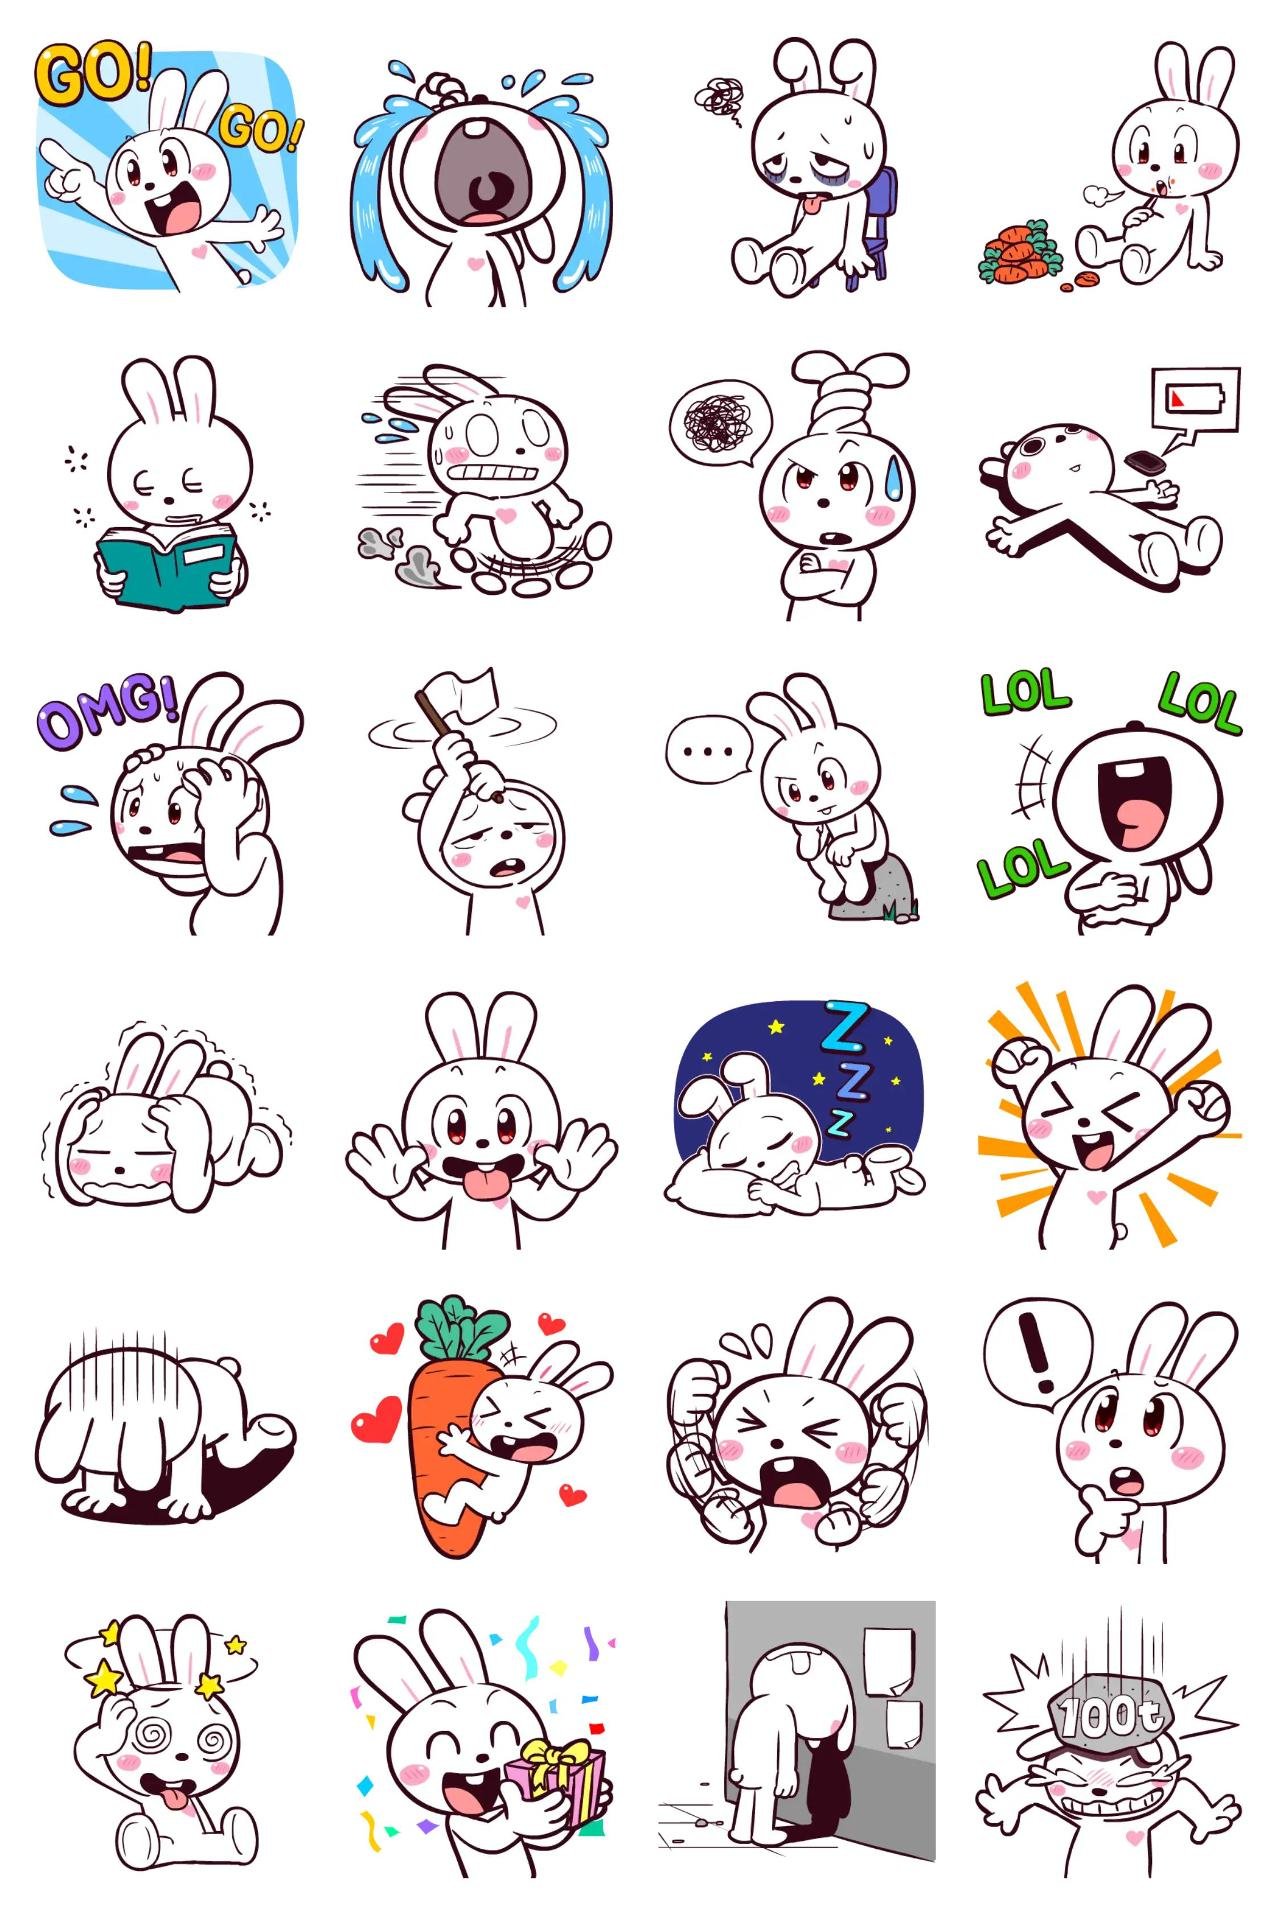 Funny Rabbit LATTE Animation/Cartoon,Animals sticker pack for Whatsapp, Telegram, Signal, and others chatting and message apps